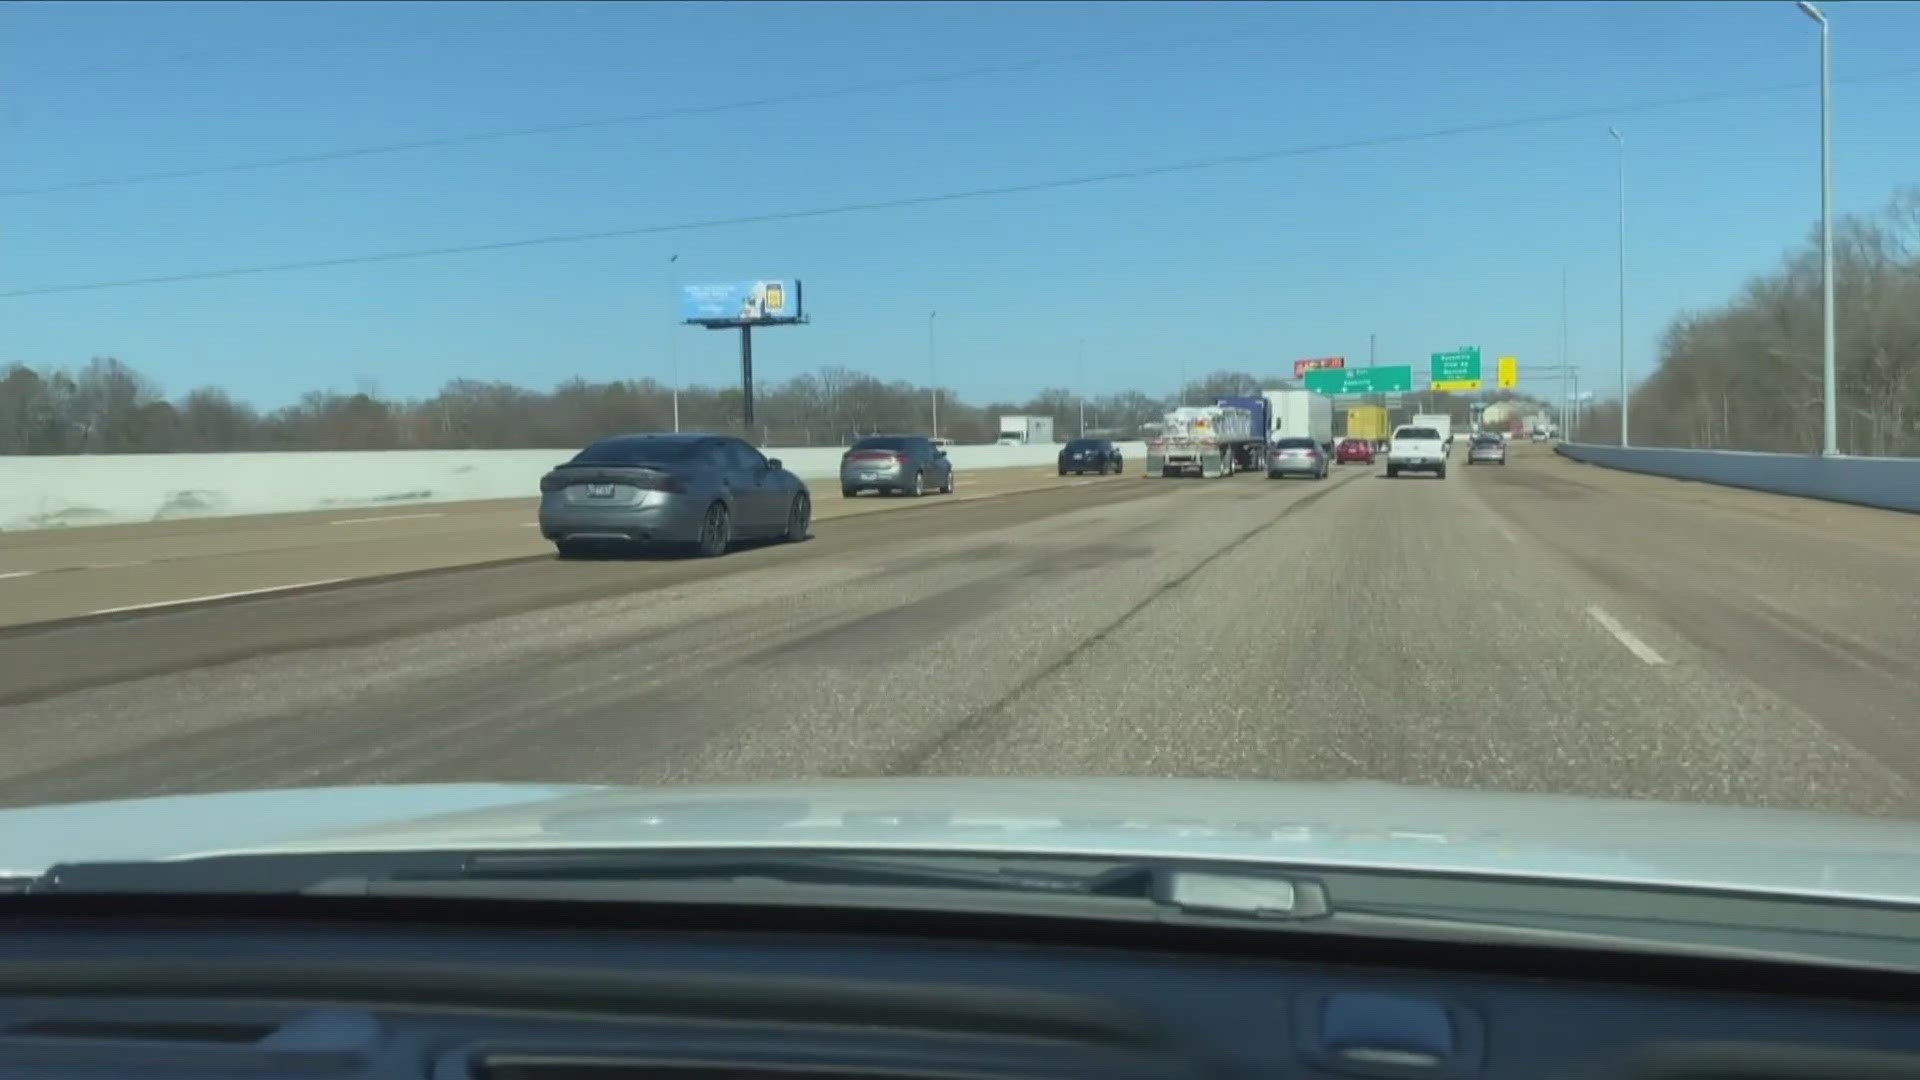 On Feb. 13, we reached out for an update from TDOT, who said they are hoping to fix the pavement in the coming weeks.